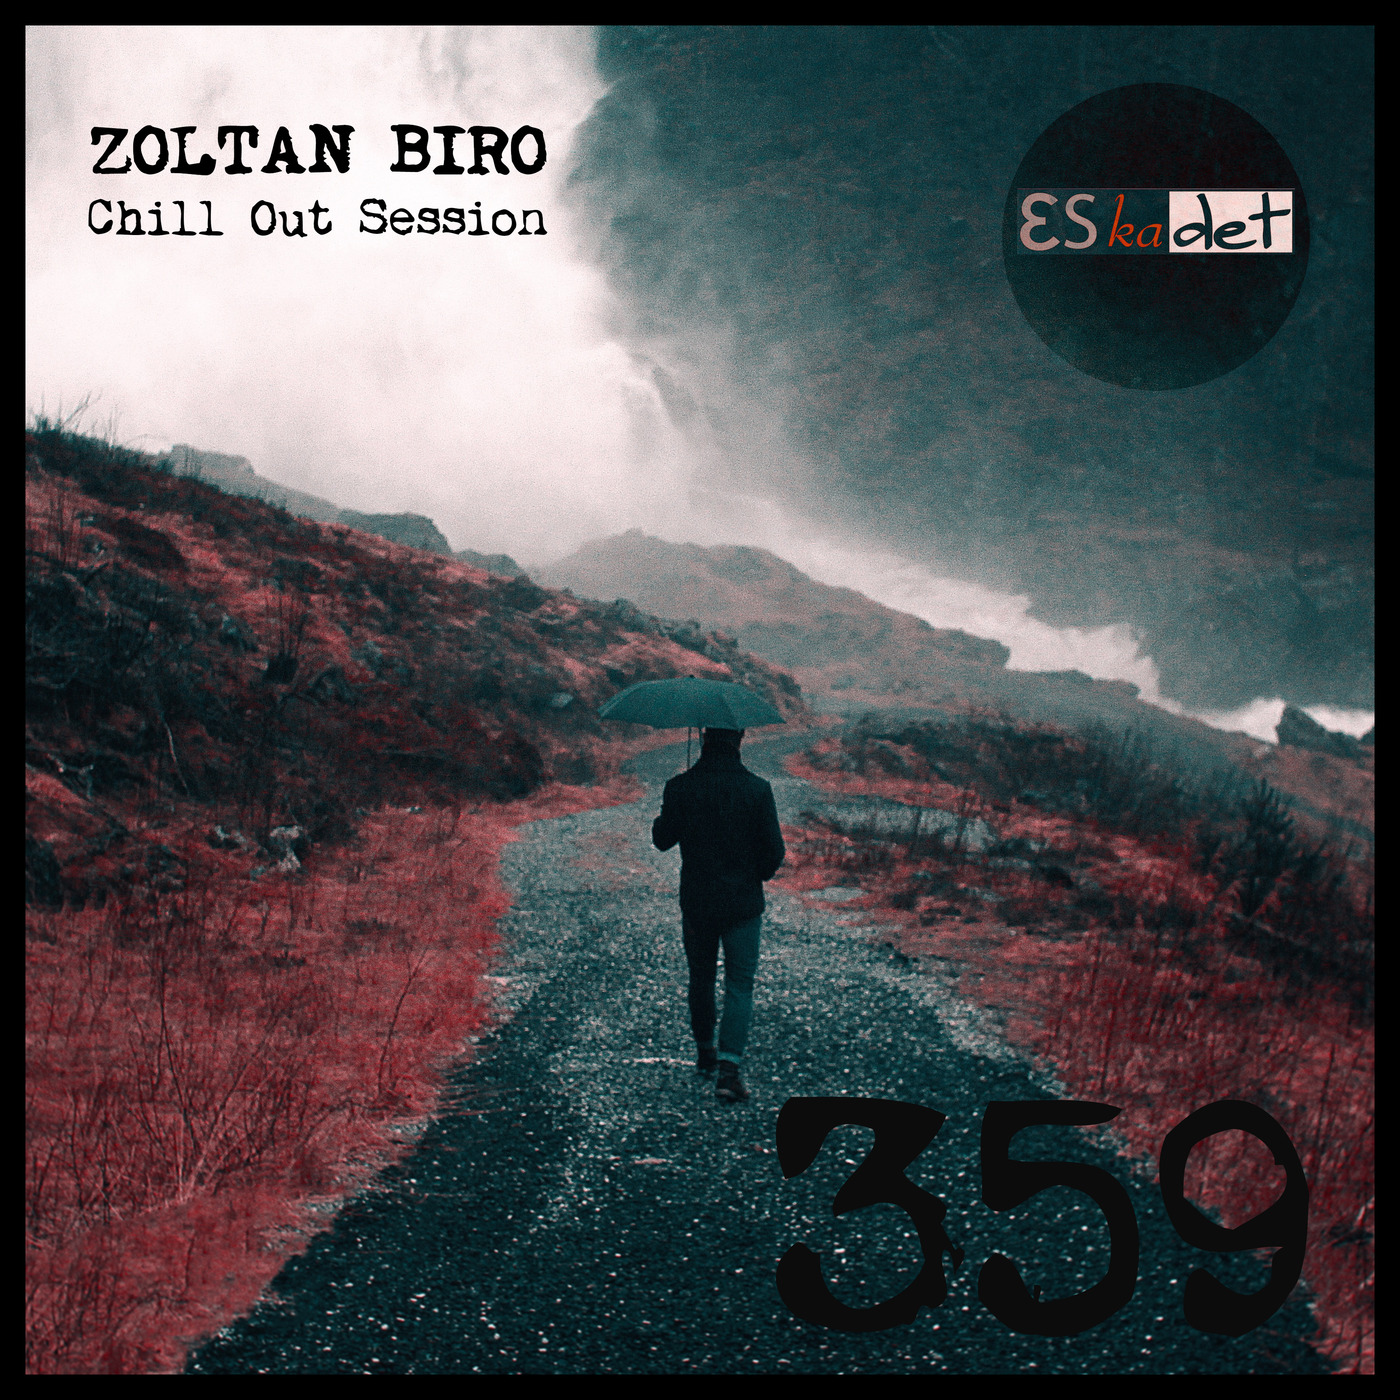 Zoltan Biro - Chill Out Session 359 [including: Eskadet Special Mix]